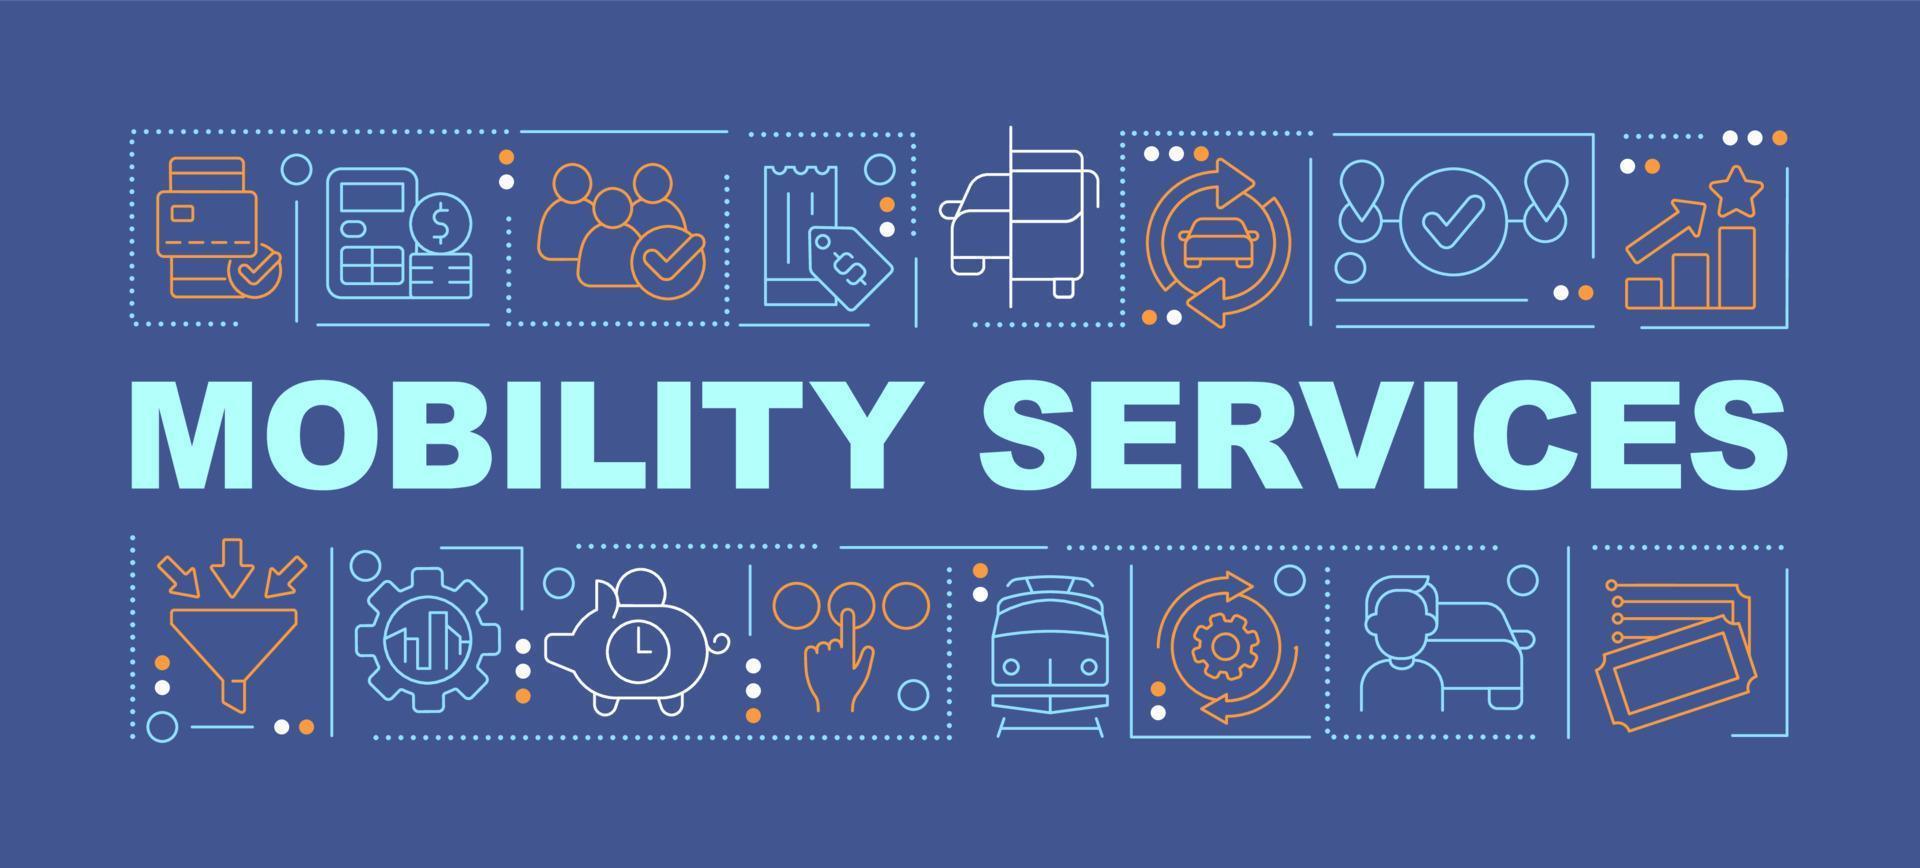 Mobility services word concepts dark blue banner. Transport system. Infographics with editable icons on color background. Isolated typography. Vector illustration with text.